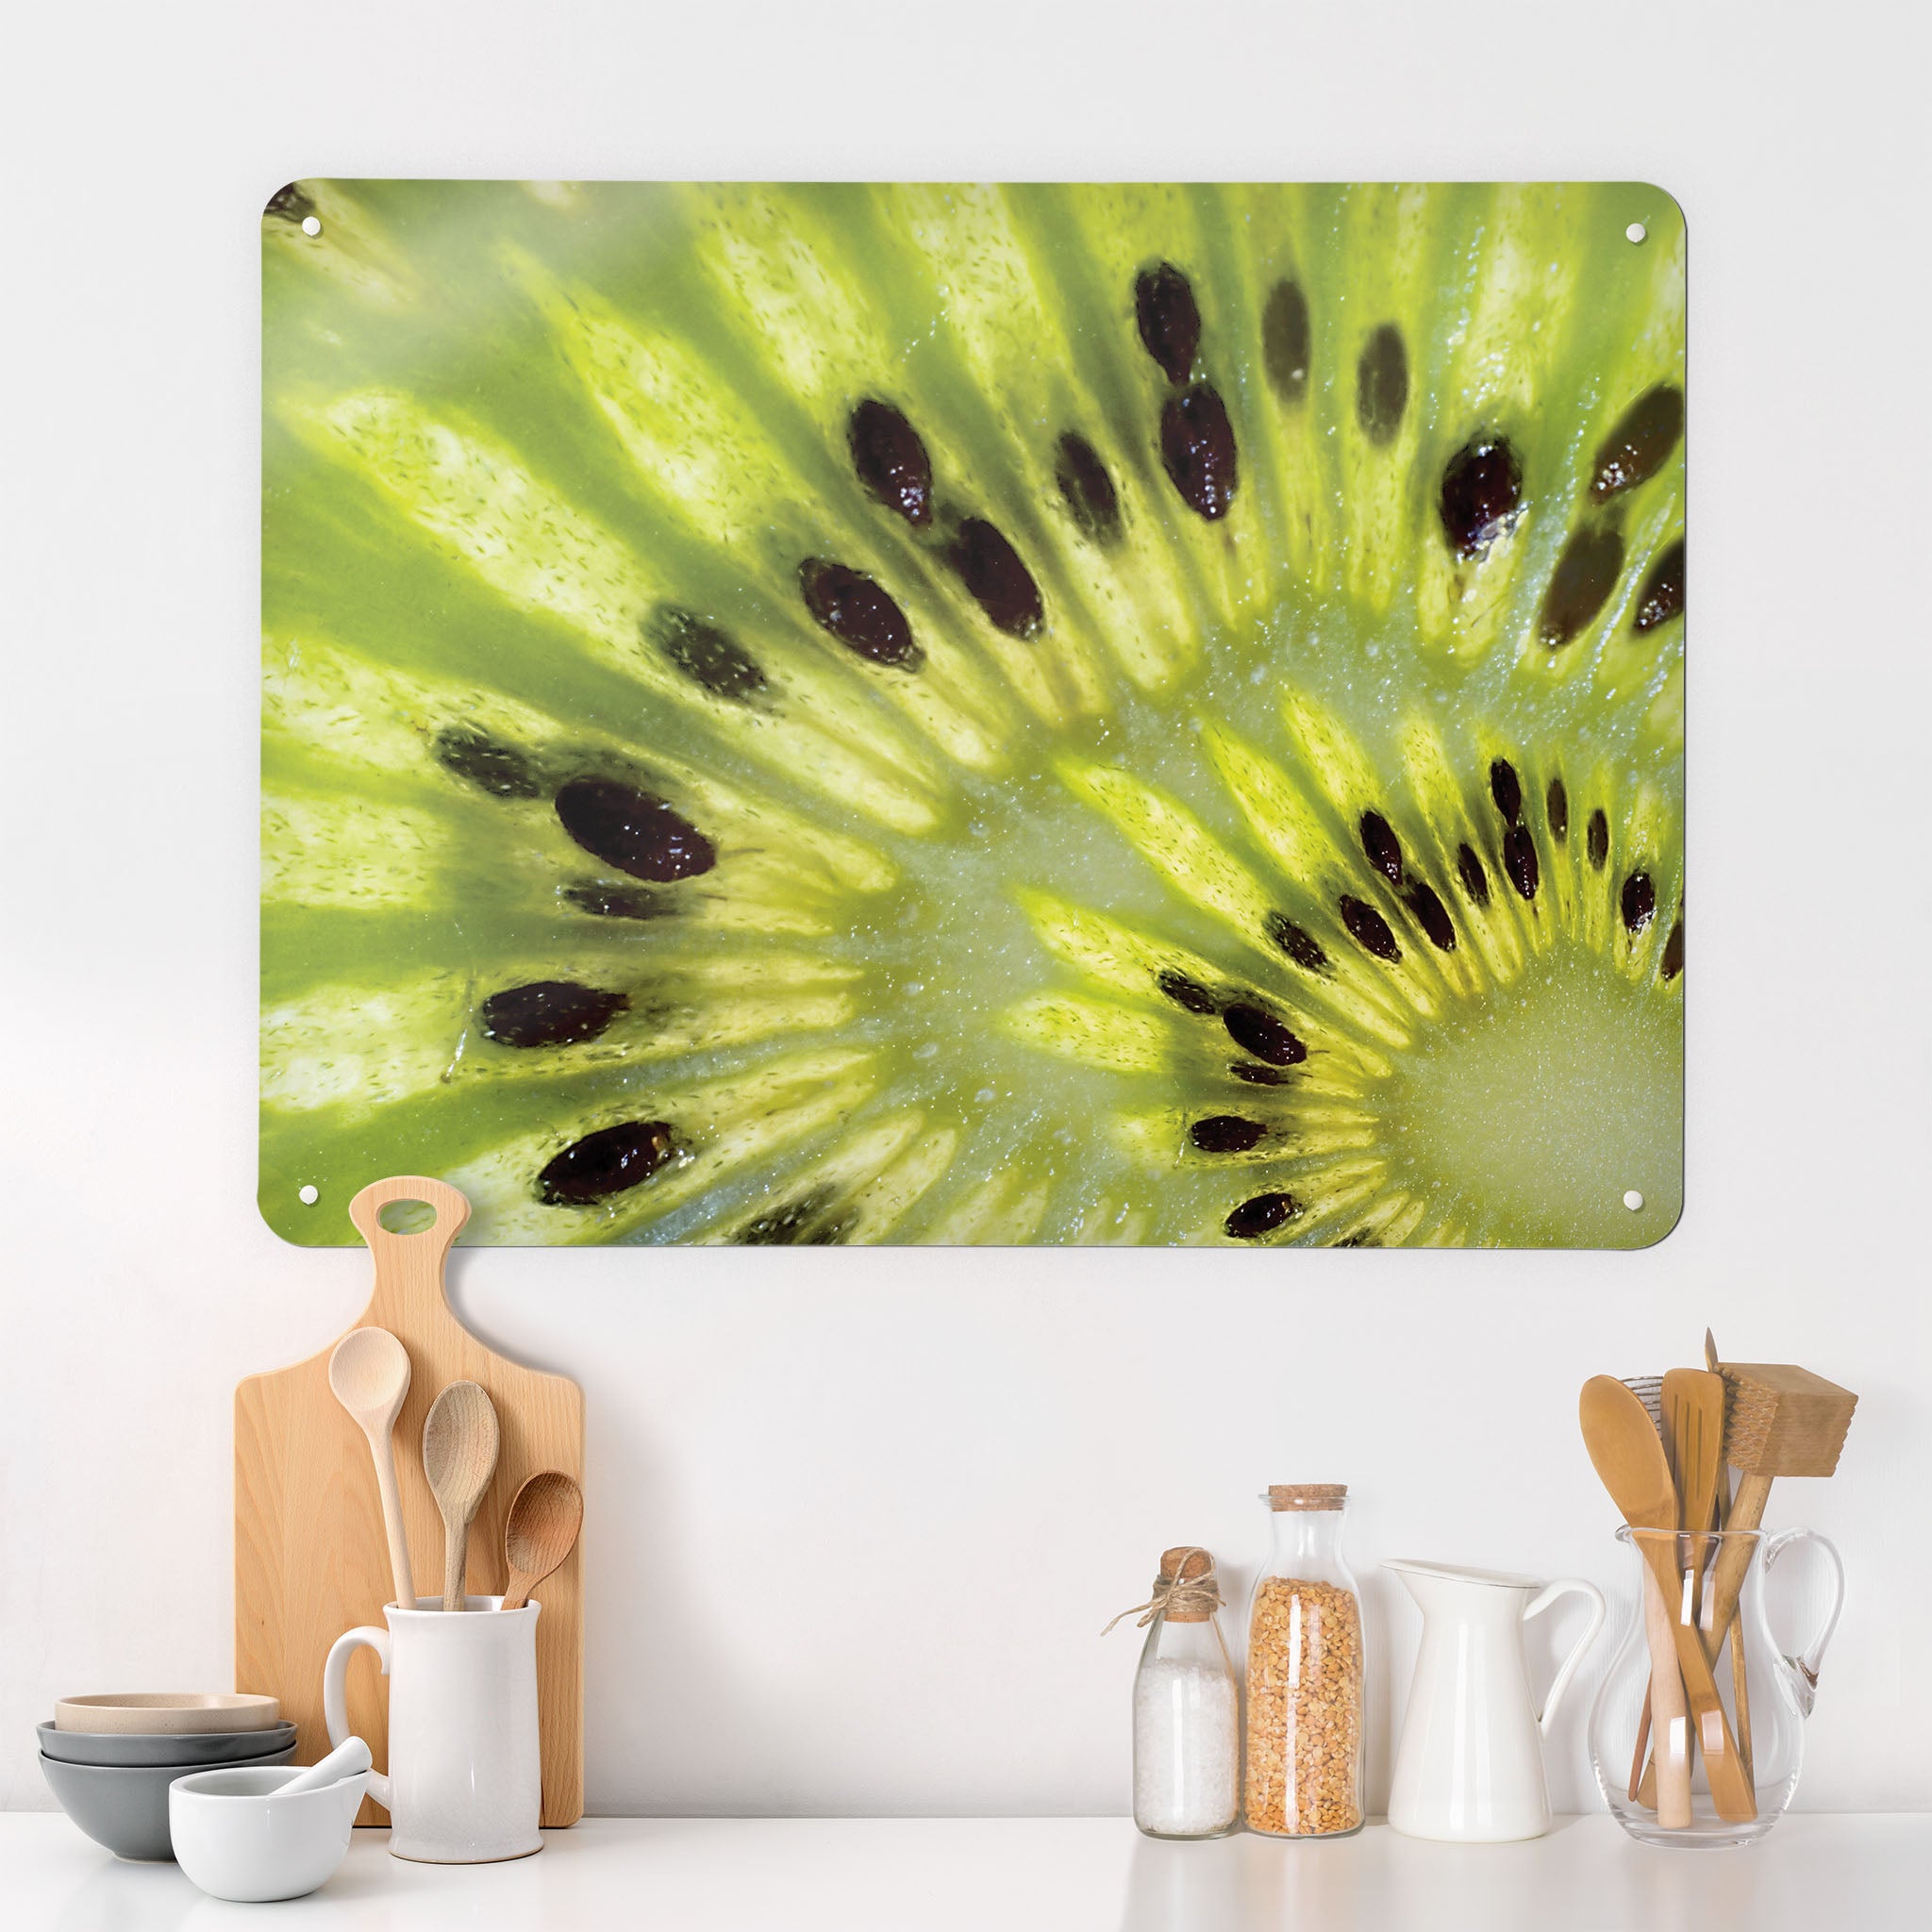 A kitchen  interior with a magnetic metal wall art panel showing a close up photograph of a slice of green Kiwi fruit